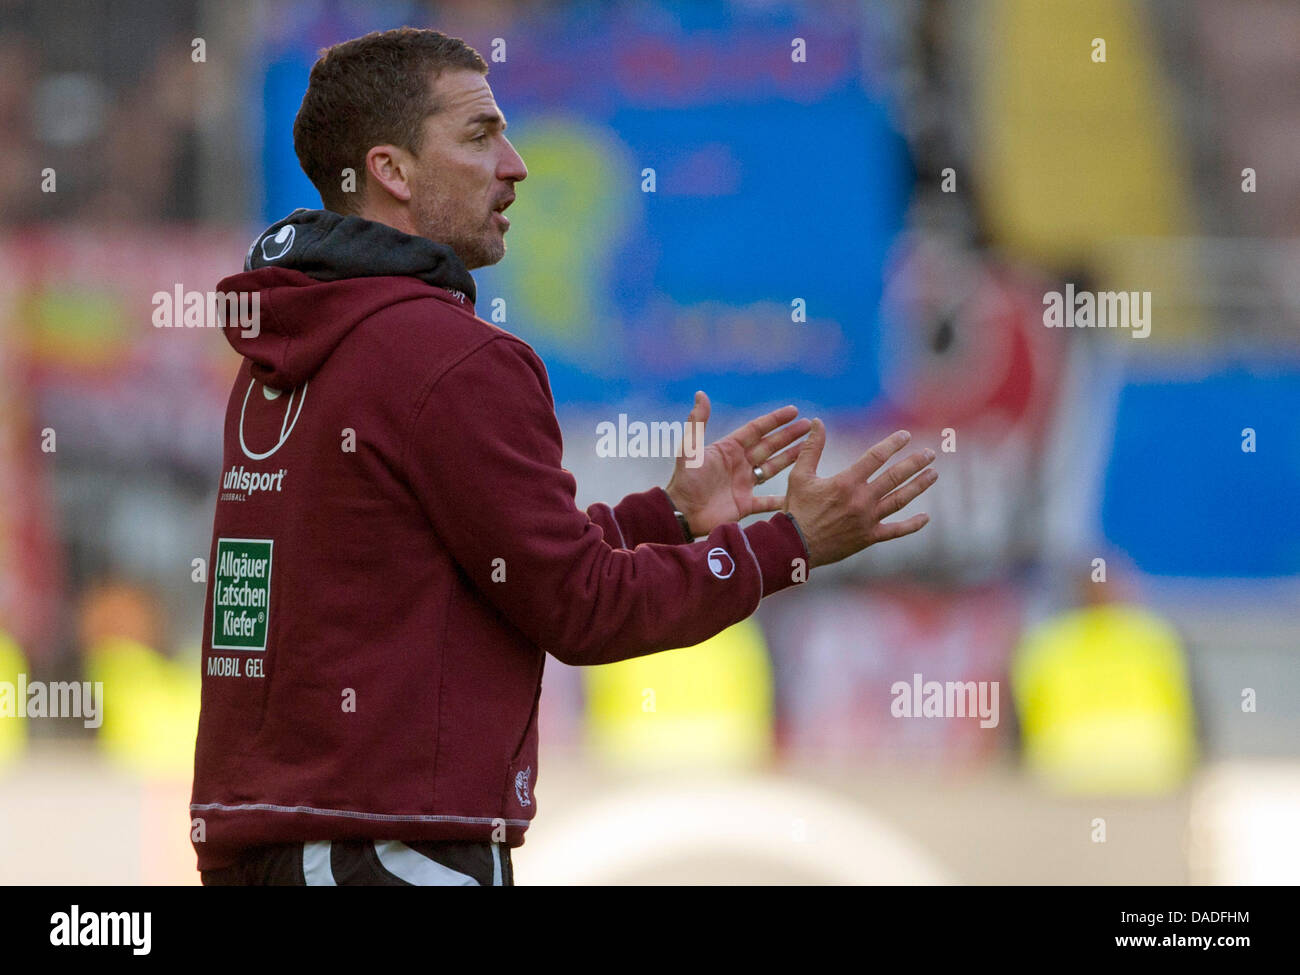 Kaiserslautern's head coach Marco Kurz gestures from the sidelines during the German Bundesliga match between FC Kaiserslautern and SC Freiburg at the Fritz-Walter-Stadium in Kaiserslautern, Germany, 22 October 2011. Photo: UWE ANSPACH  (ATTENTION: EMBARGO CONDITIONS! The DFL permits the further utilisation of the pictures in IPTV, mobile services and other new technologies only no Stock Photo